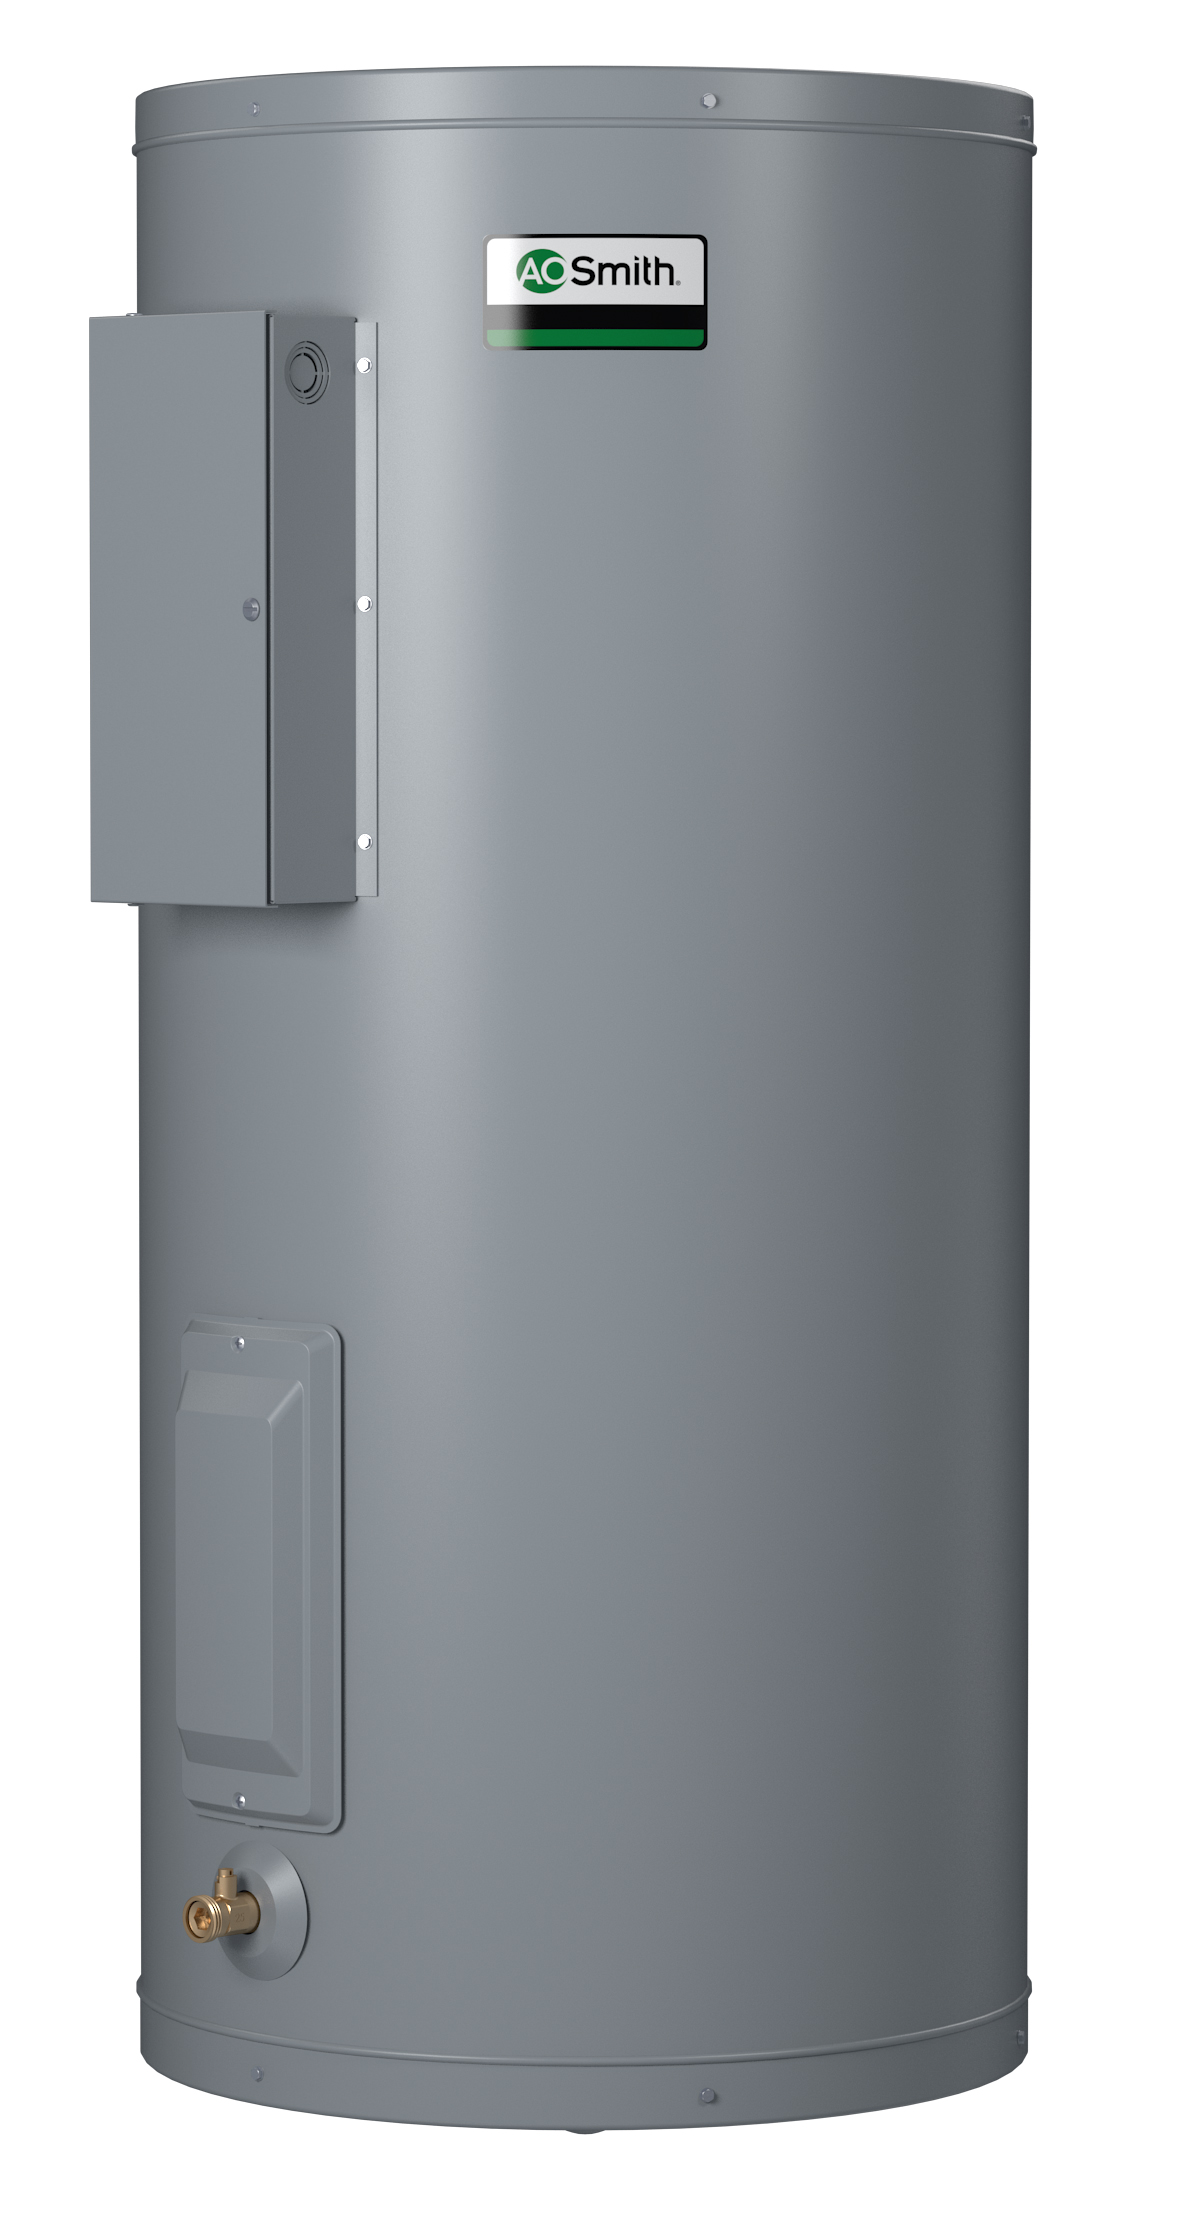 AO SMITH DEN-120D: 120 GALLONS, 4.5KW, 240 VOLT, 1 PHASE, (2-4500 WATT ELEMENTS, NON-SIMULTANEOUS WIRING), DURA-POWER, LIGHT DUTY COMMERCIAL ELECTRIC WATER HEATER